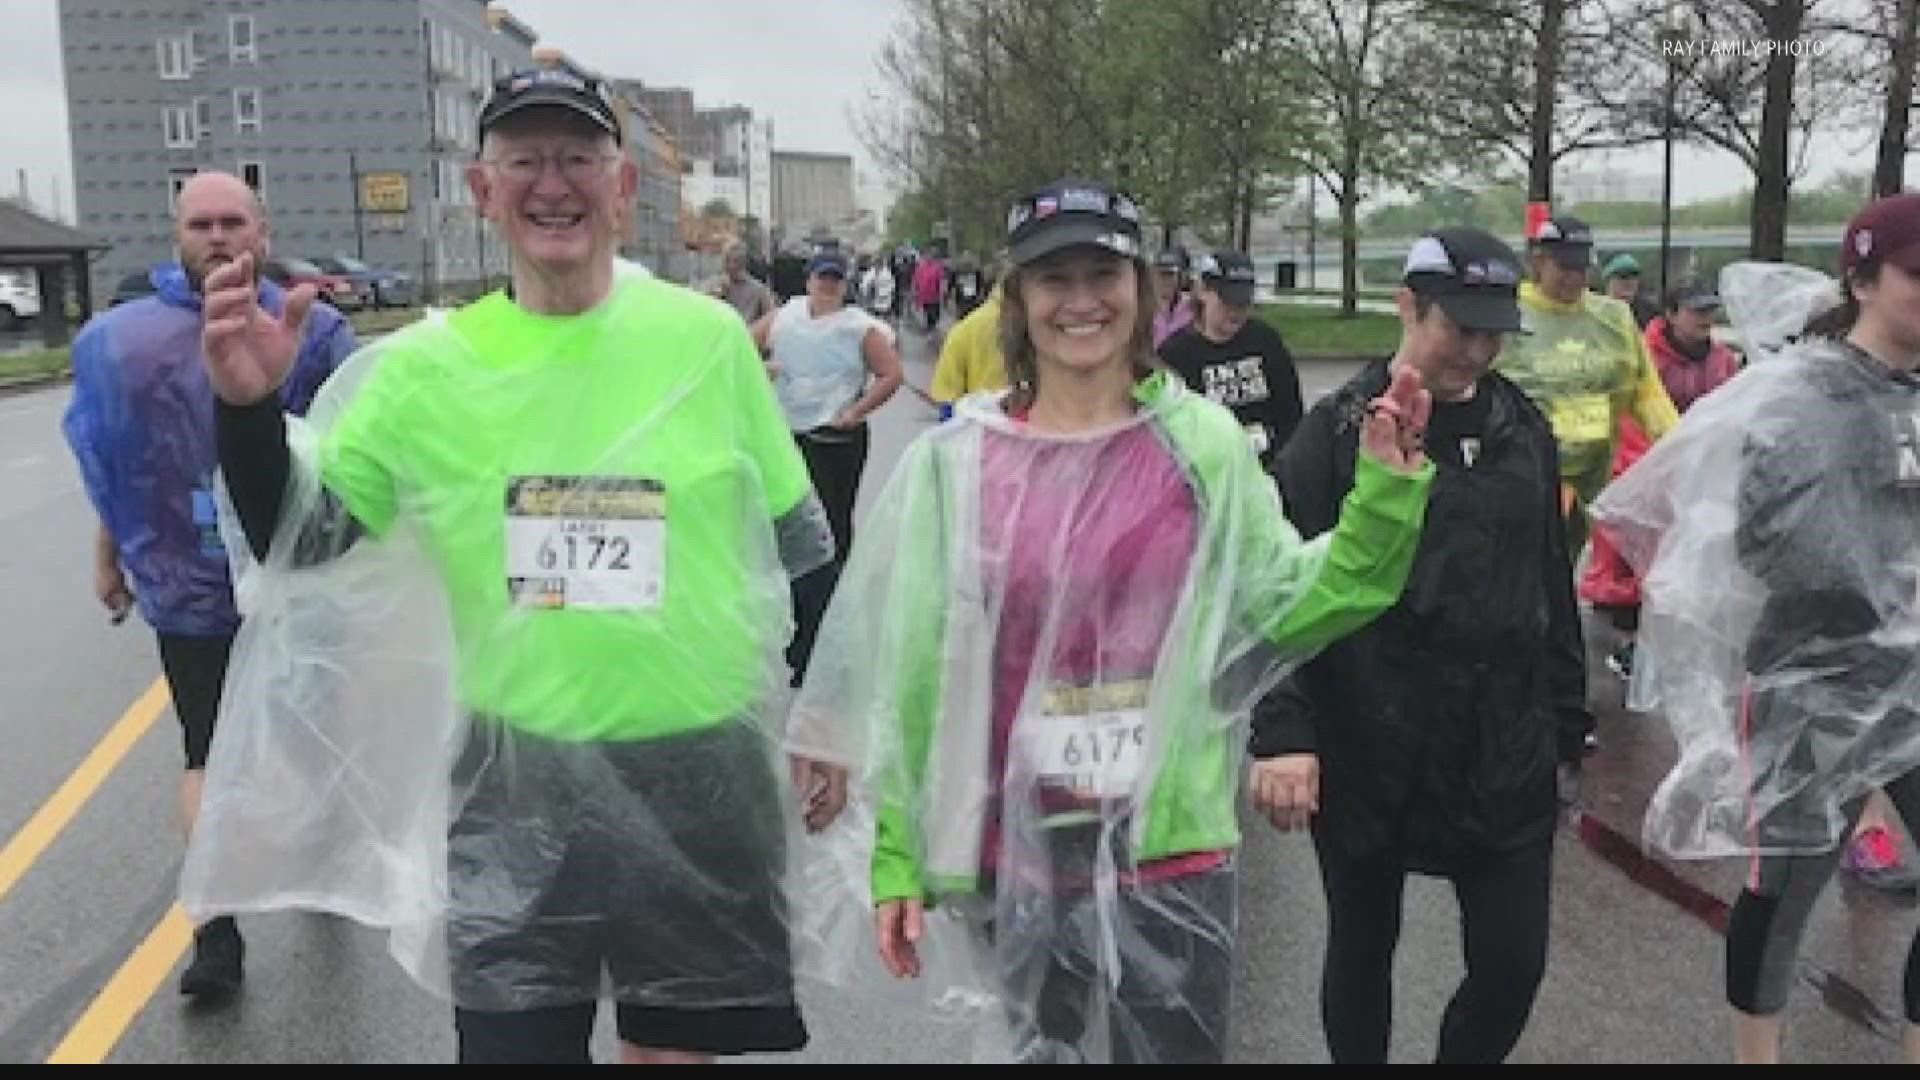 A father and daughter ran the Mini-Marathon together for 17 years. When he died, she made plans to continue the tradition in his honor.